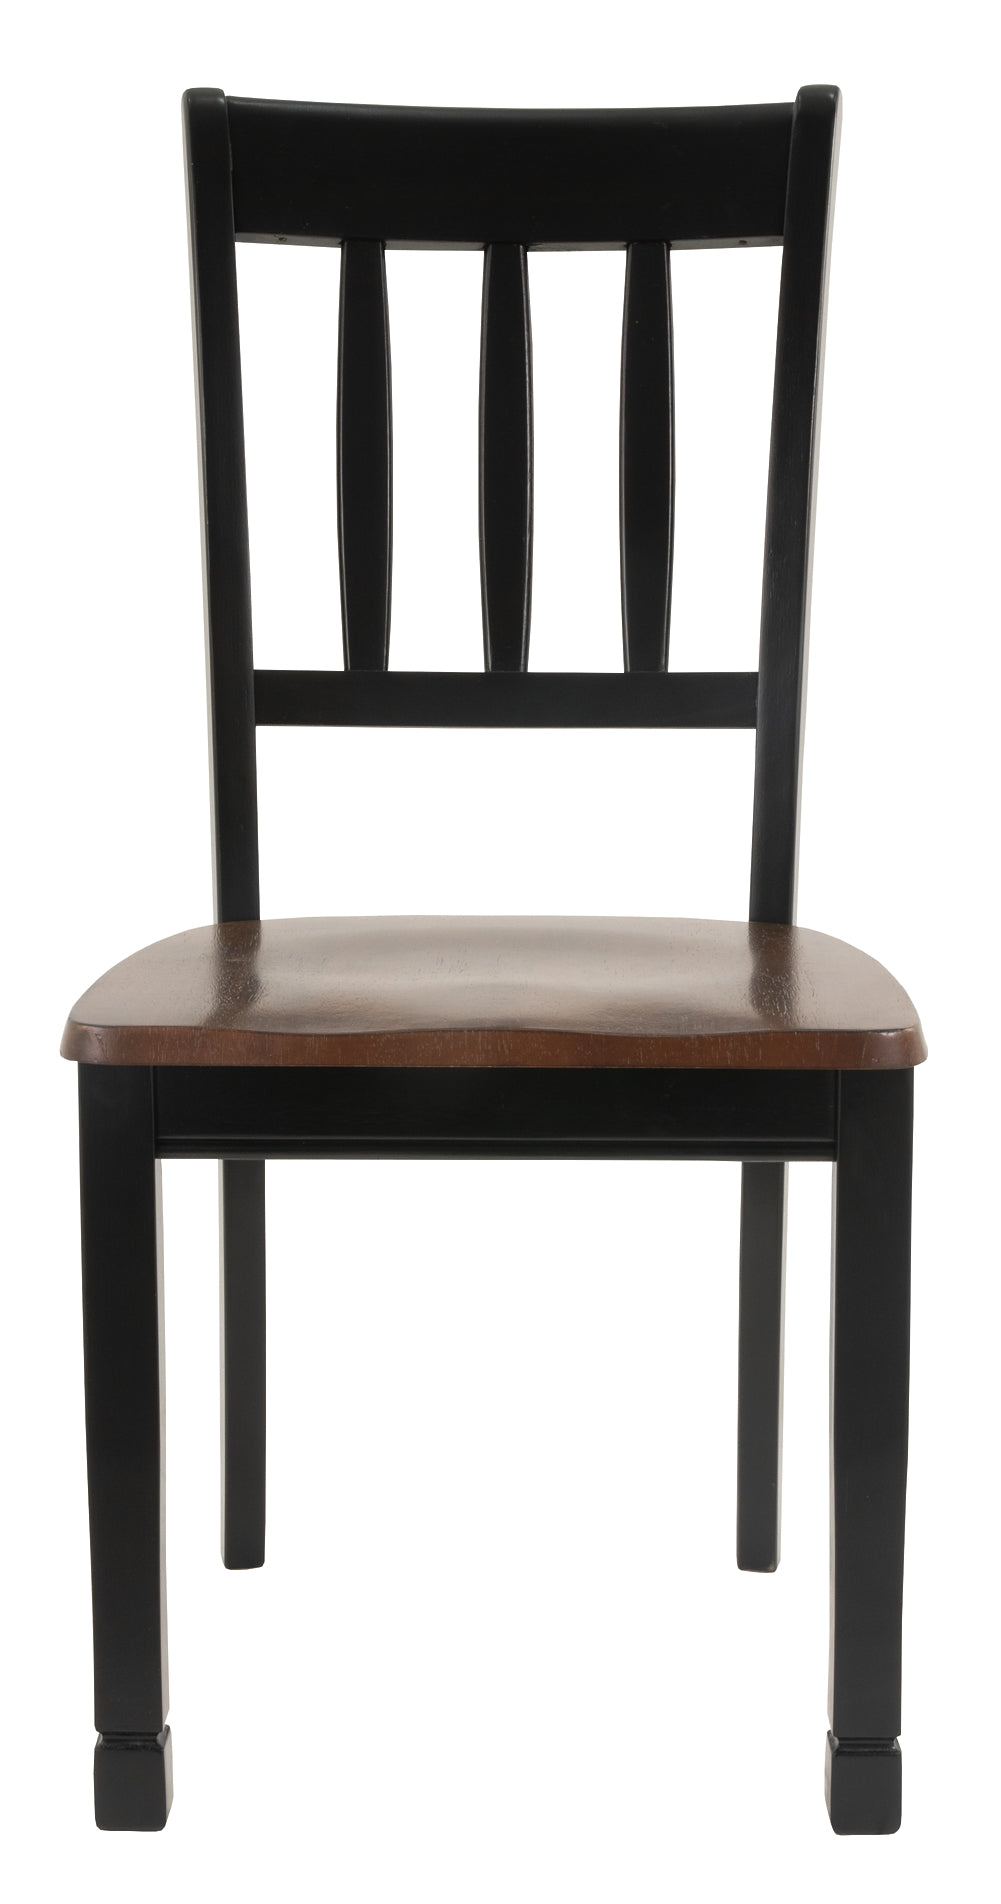 Owingsville Dining Chair (Set of 2) JB's Furniture  Home Furniture, Home Decor, Furniture Store